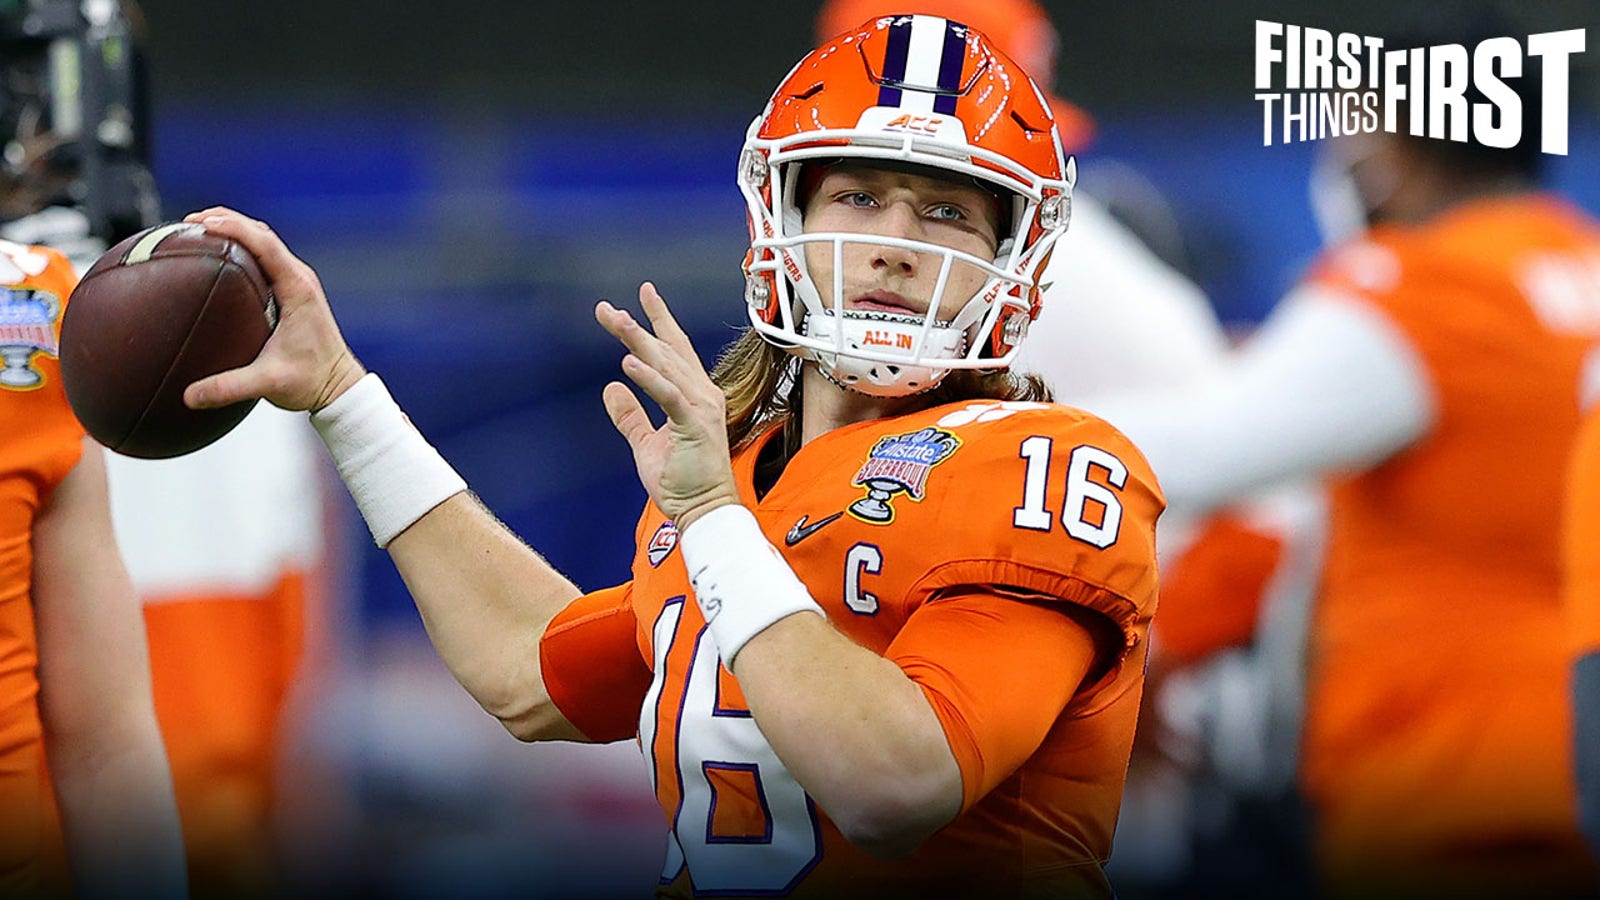 Michael Vick: The bar has been set tremendously high for Trevor Lawrence | FIRST THINGS FIRST